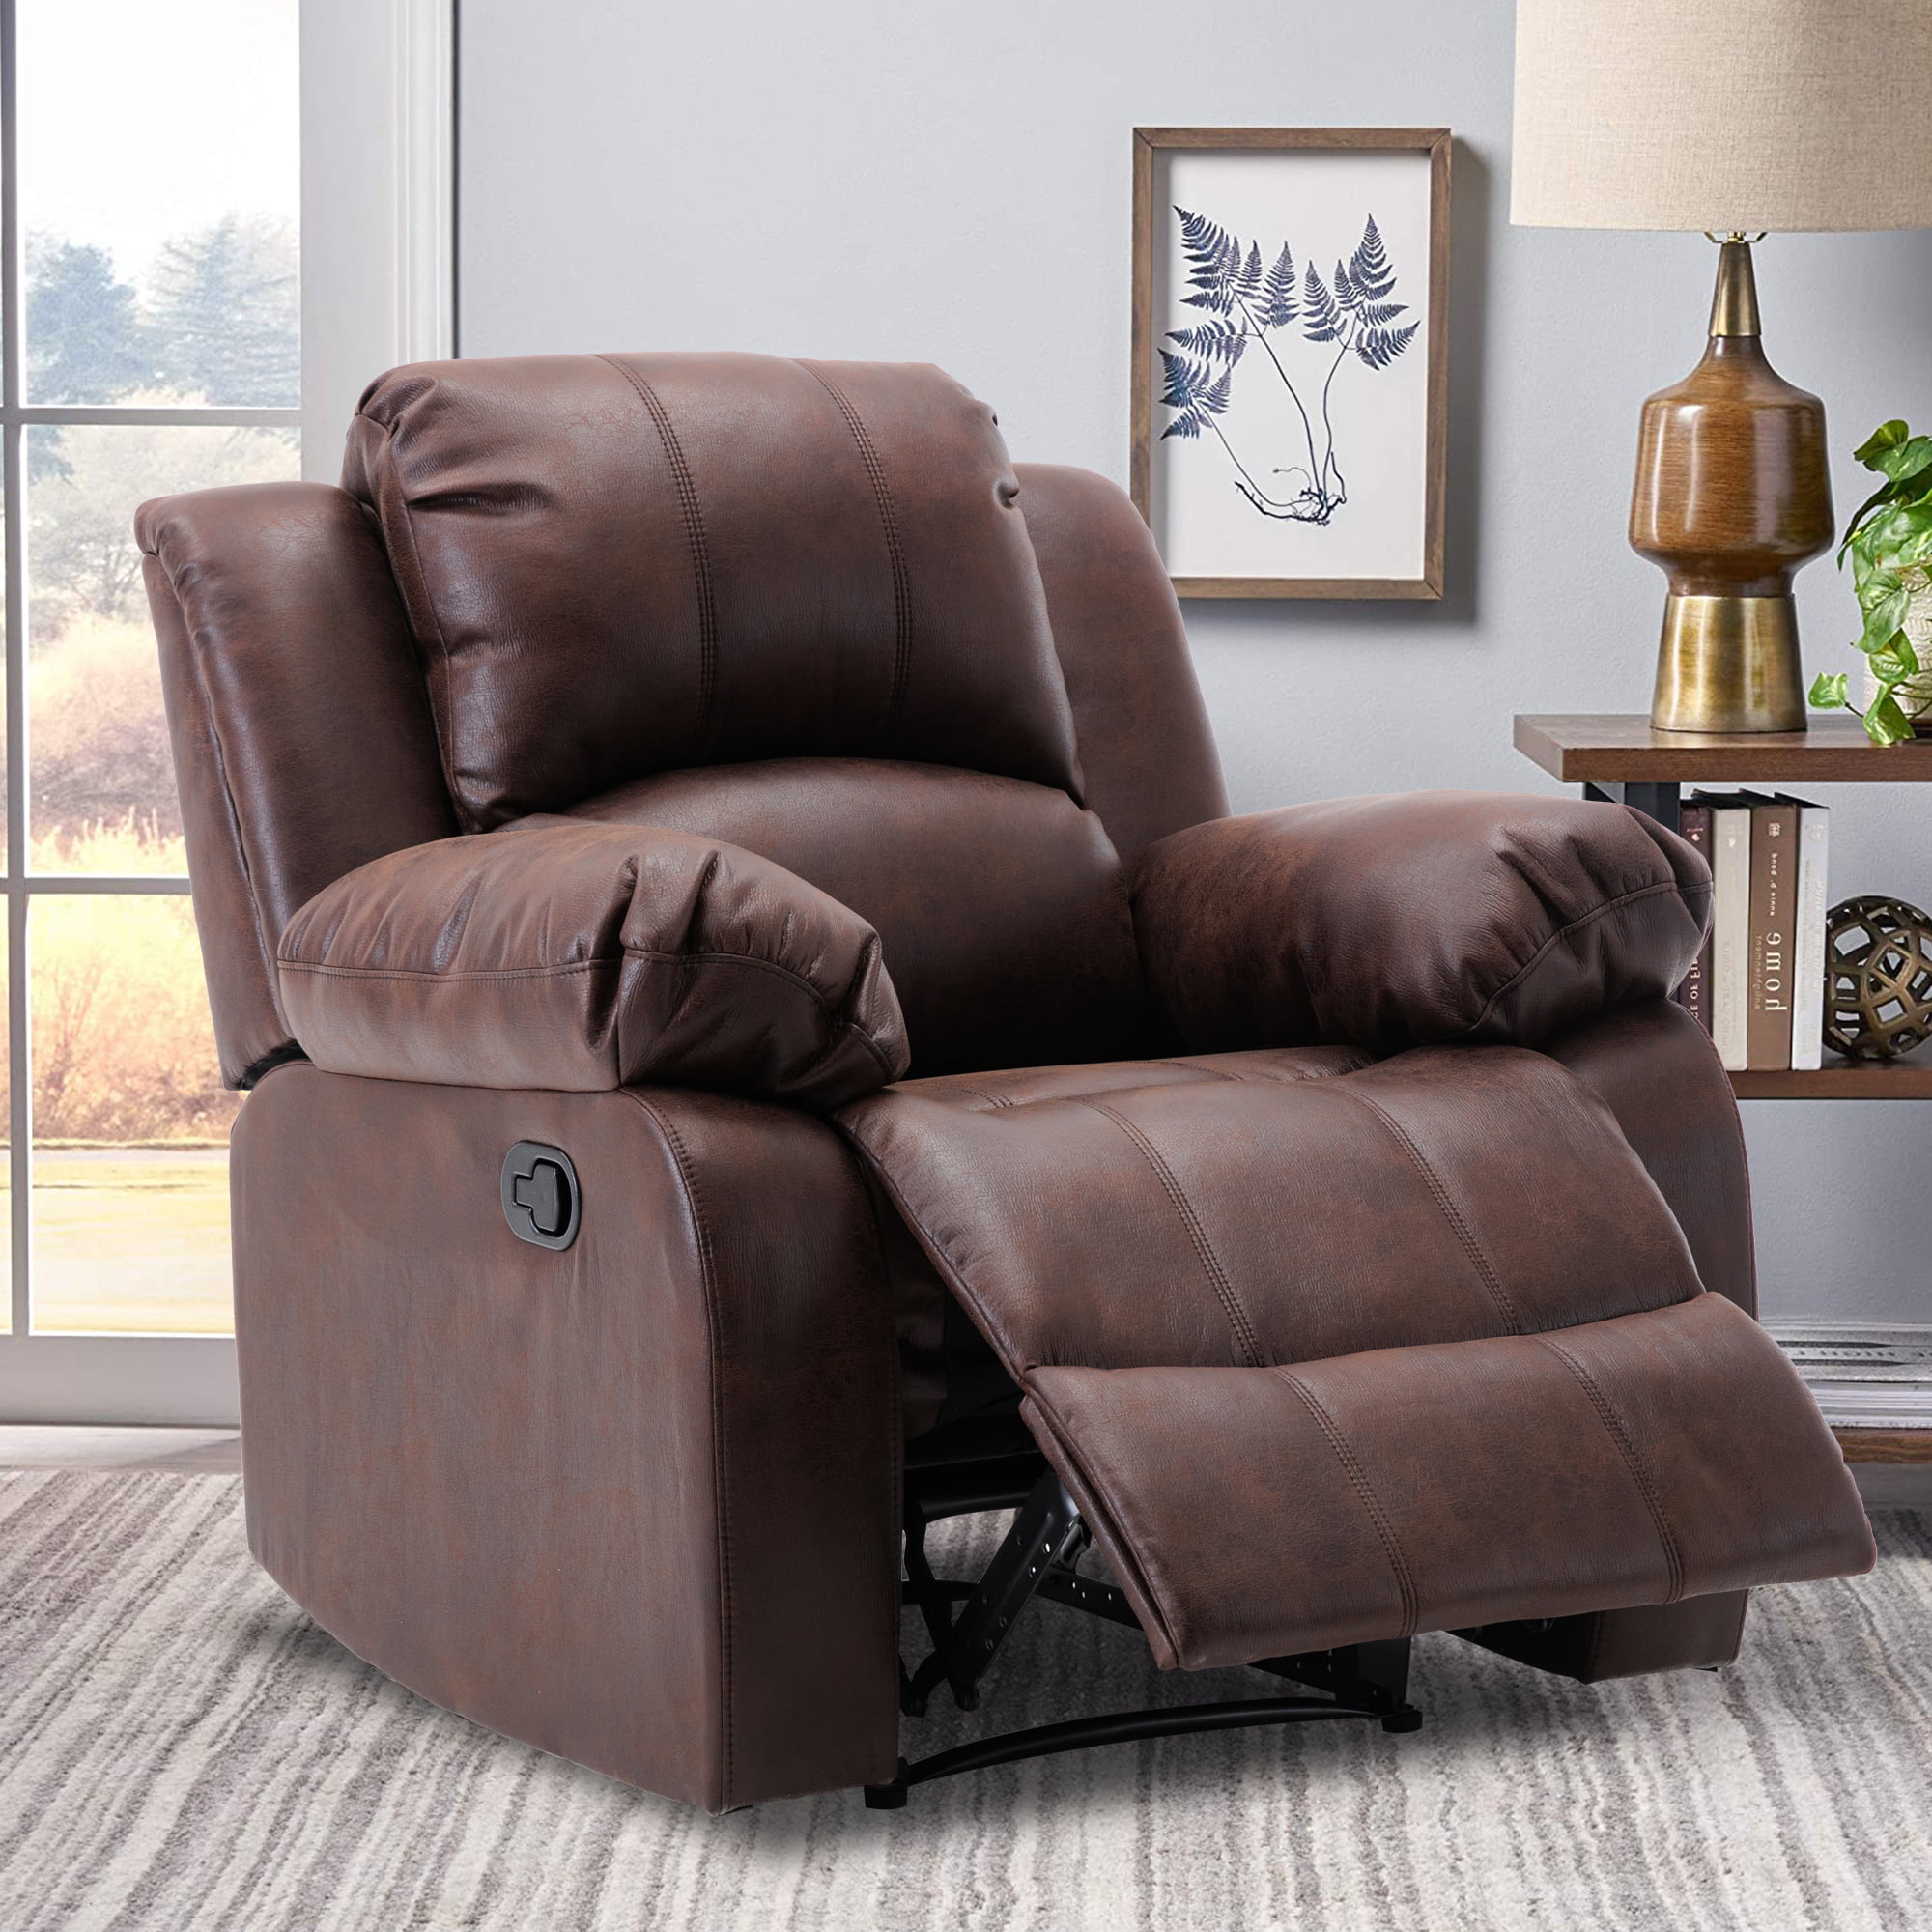 Brown Oversize Recliner Chair Sofa Reclining Padded Seat Office Gaming Lounge 